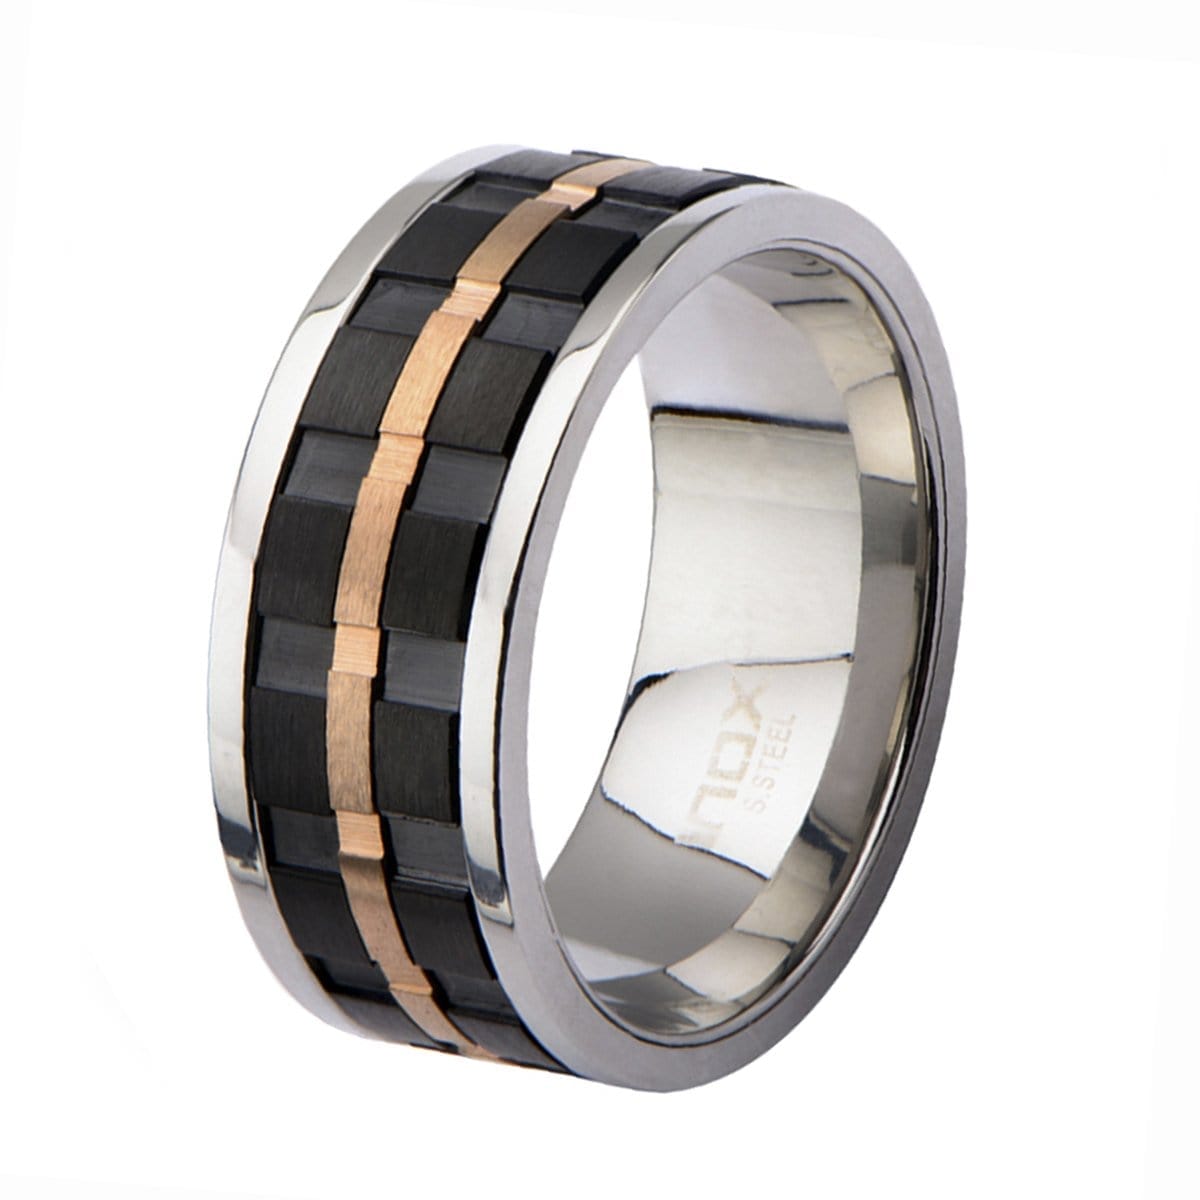 INOX JEWELRY Rings Rose Tone, Black, and Silver Tone Stainless Steel Ridged Stripe Spinner Ring